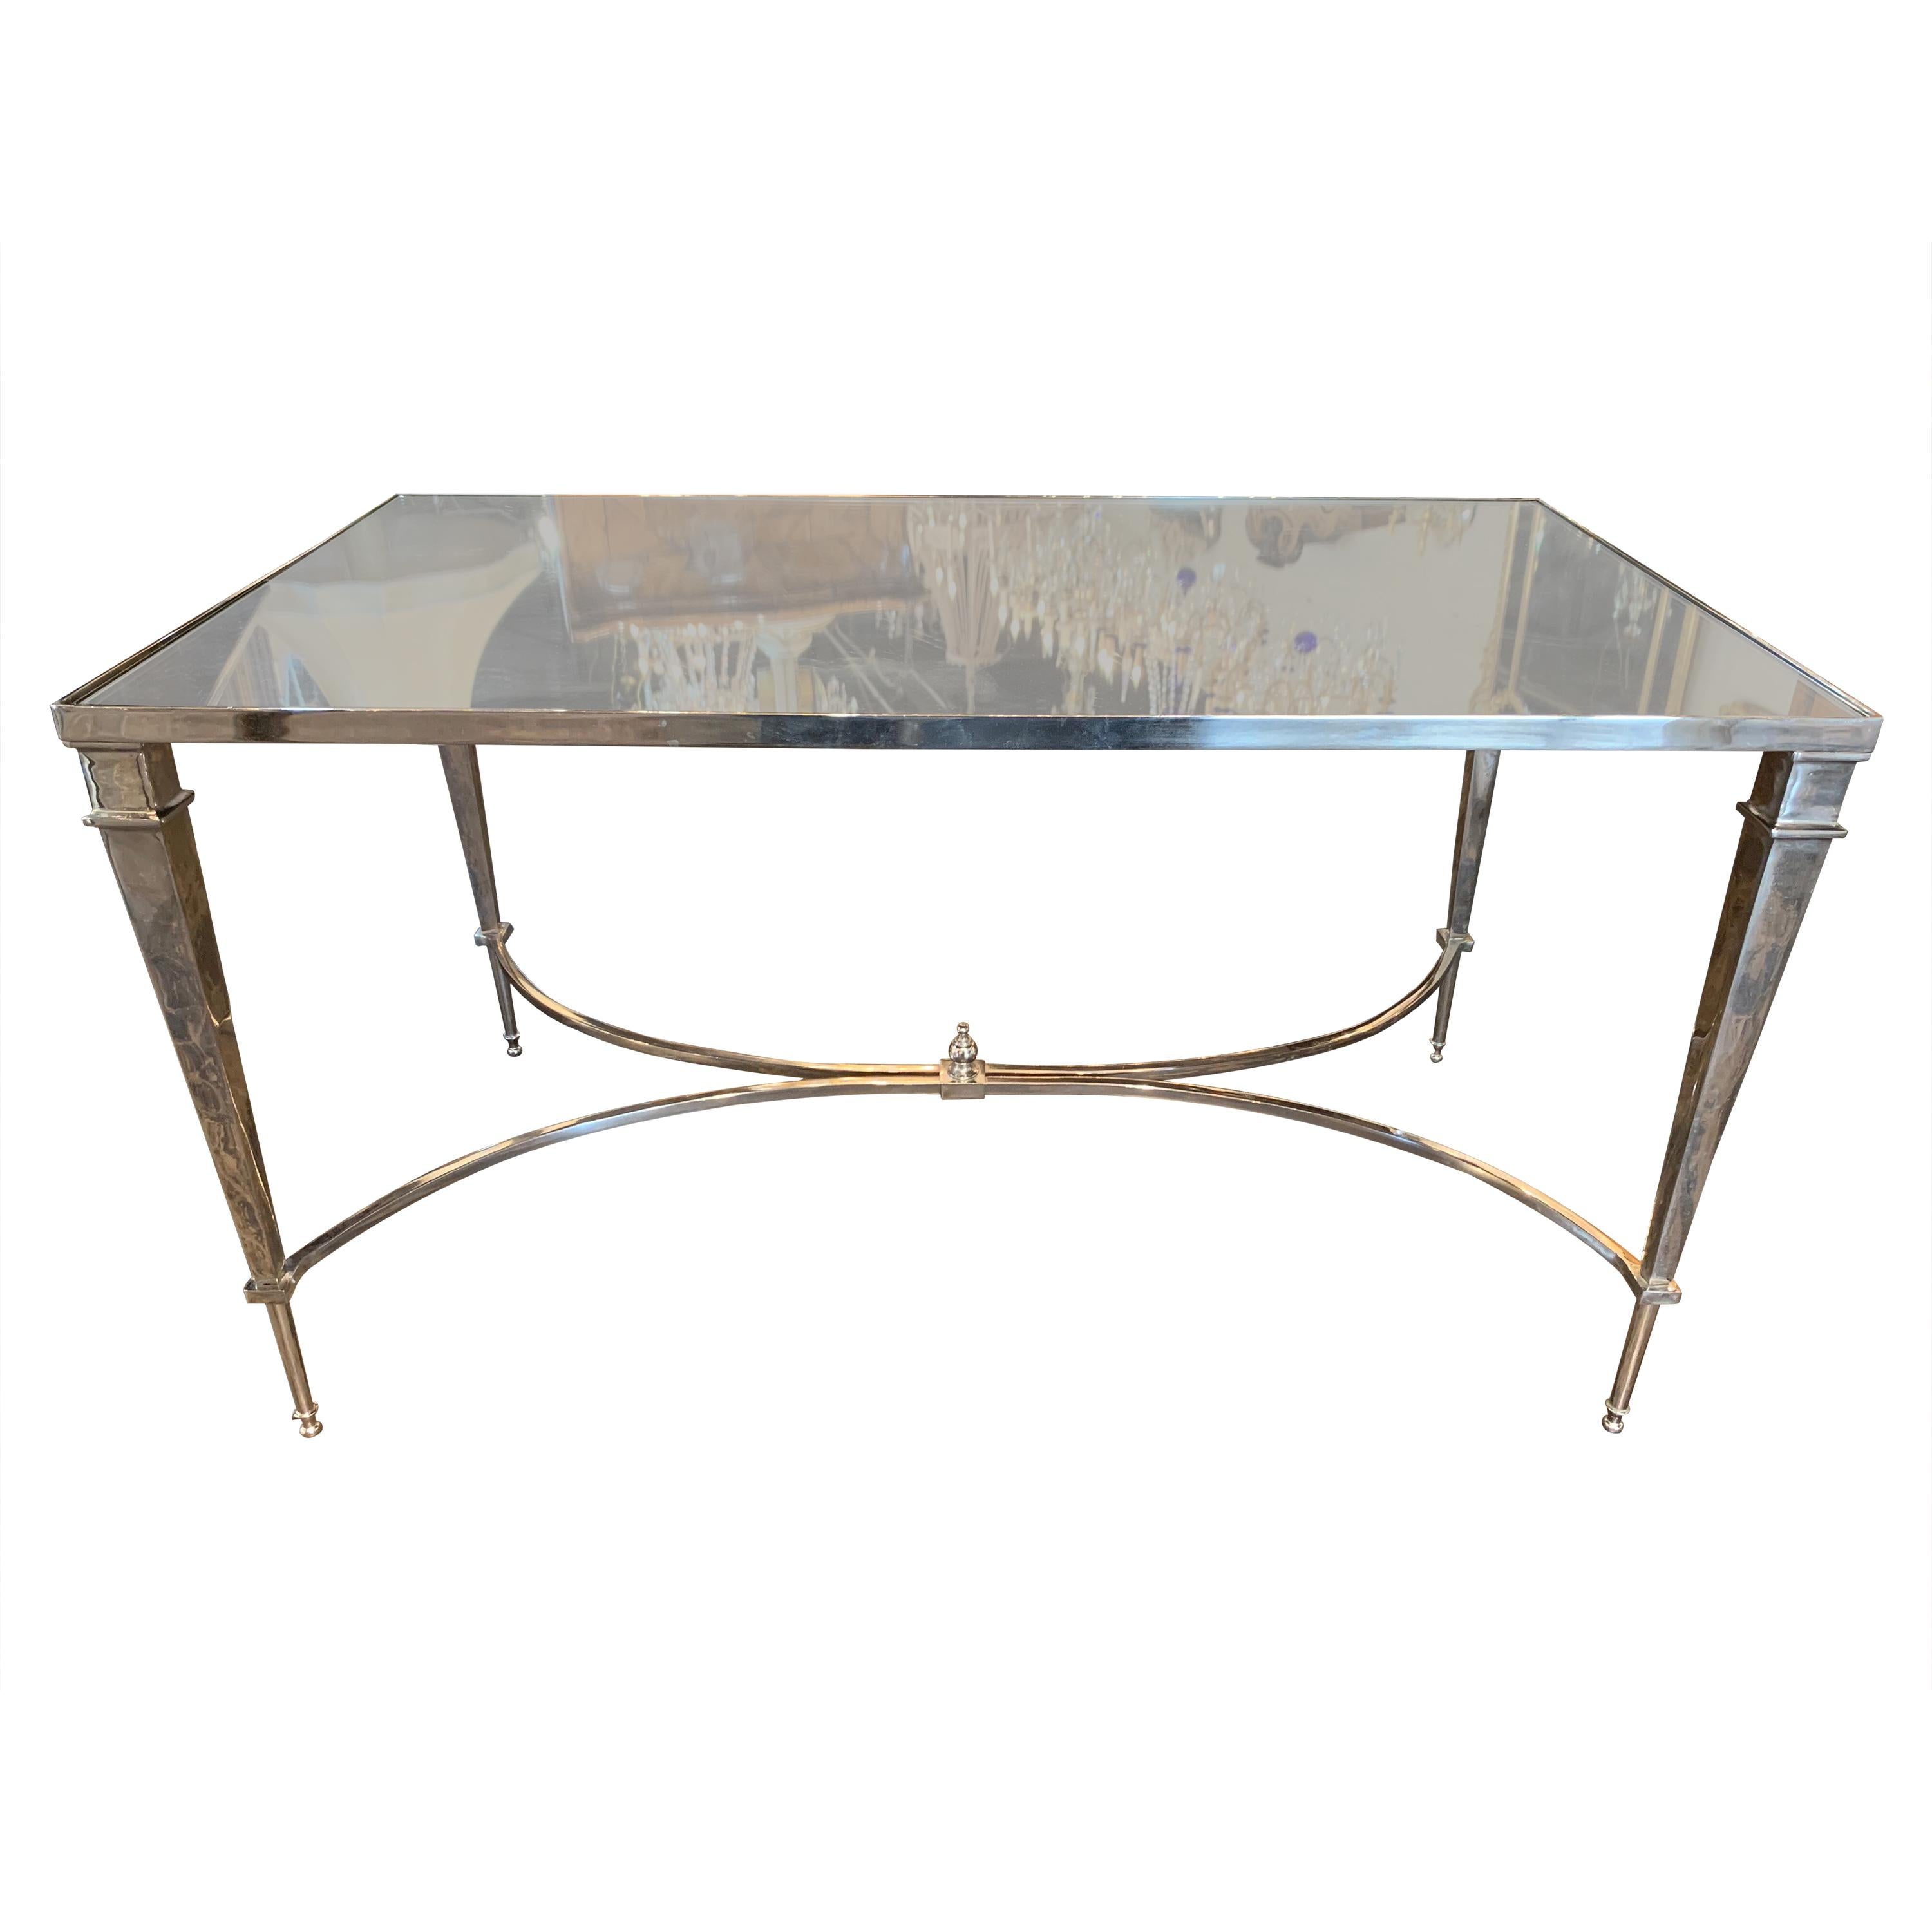 Jansen Style Coffee Table With Mirrored Top At 1stdibs